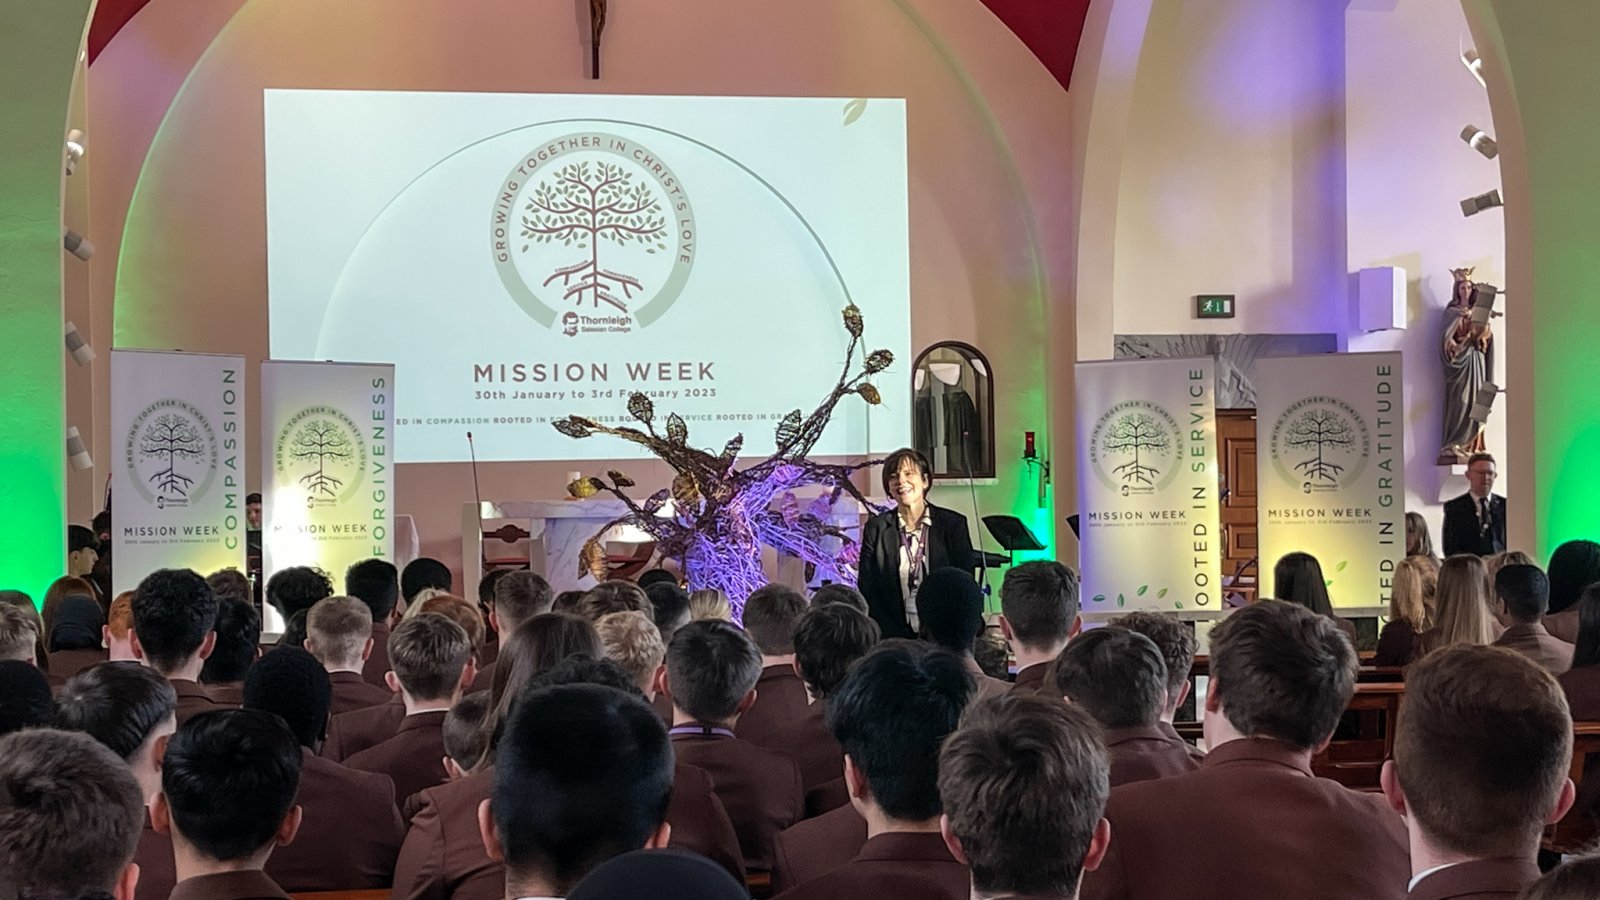 Thornleigh Mission Week - Growing together in Christ's love